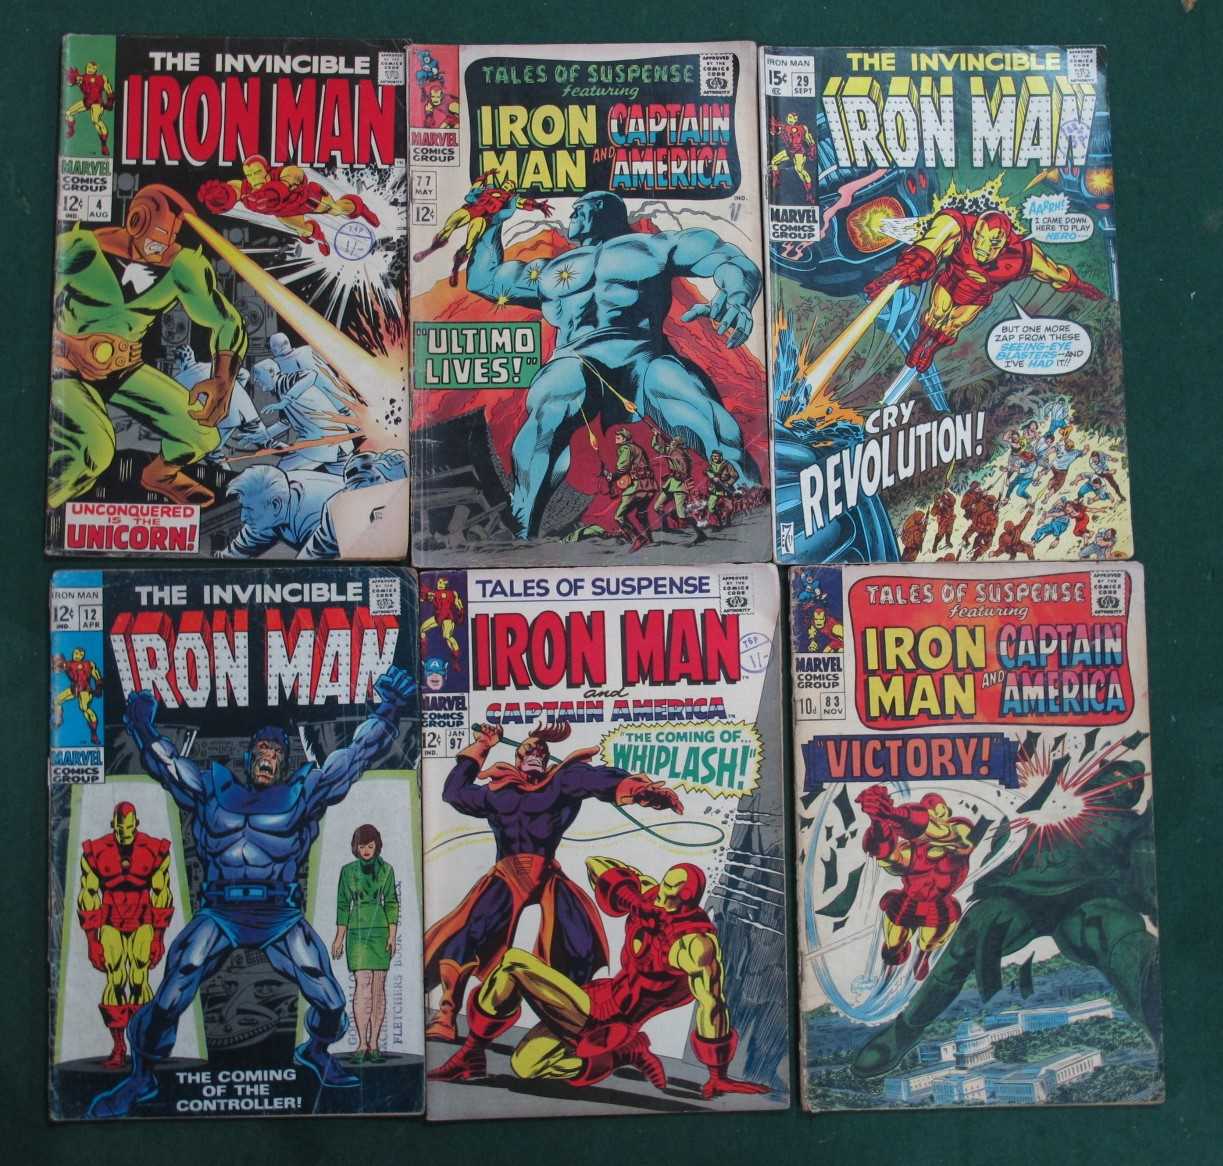 Six Marvel Comics all featuring Iron Man comprising of The Invincible Iron Man #4, #12, #29, Tales